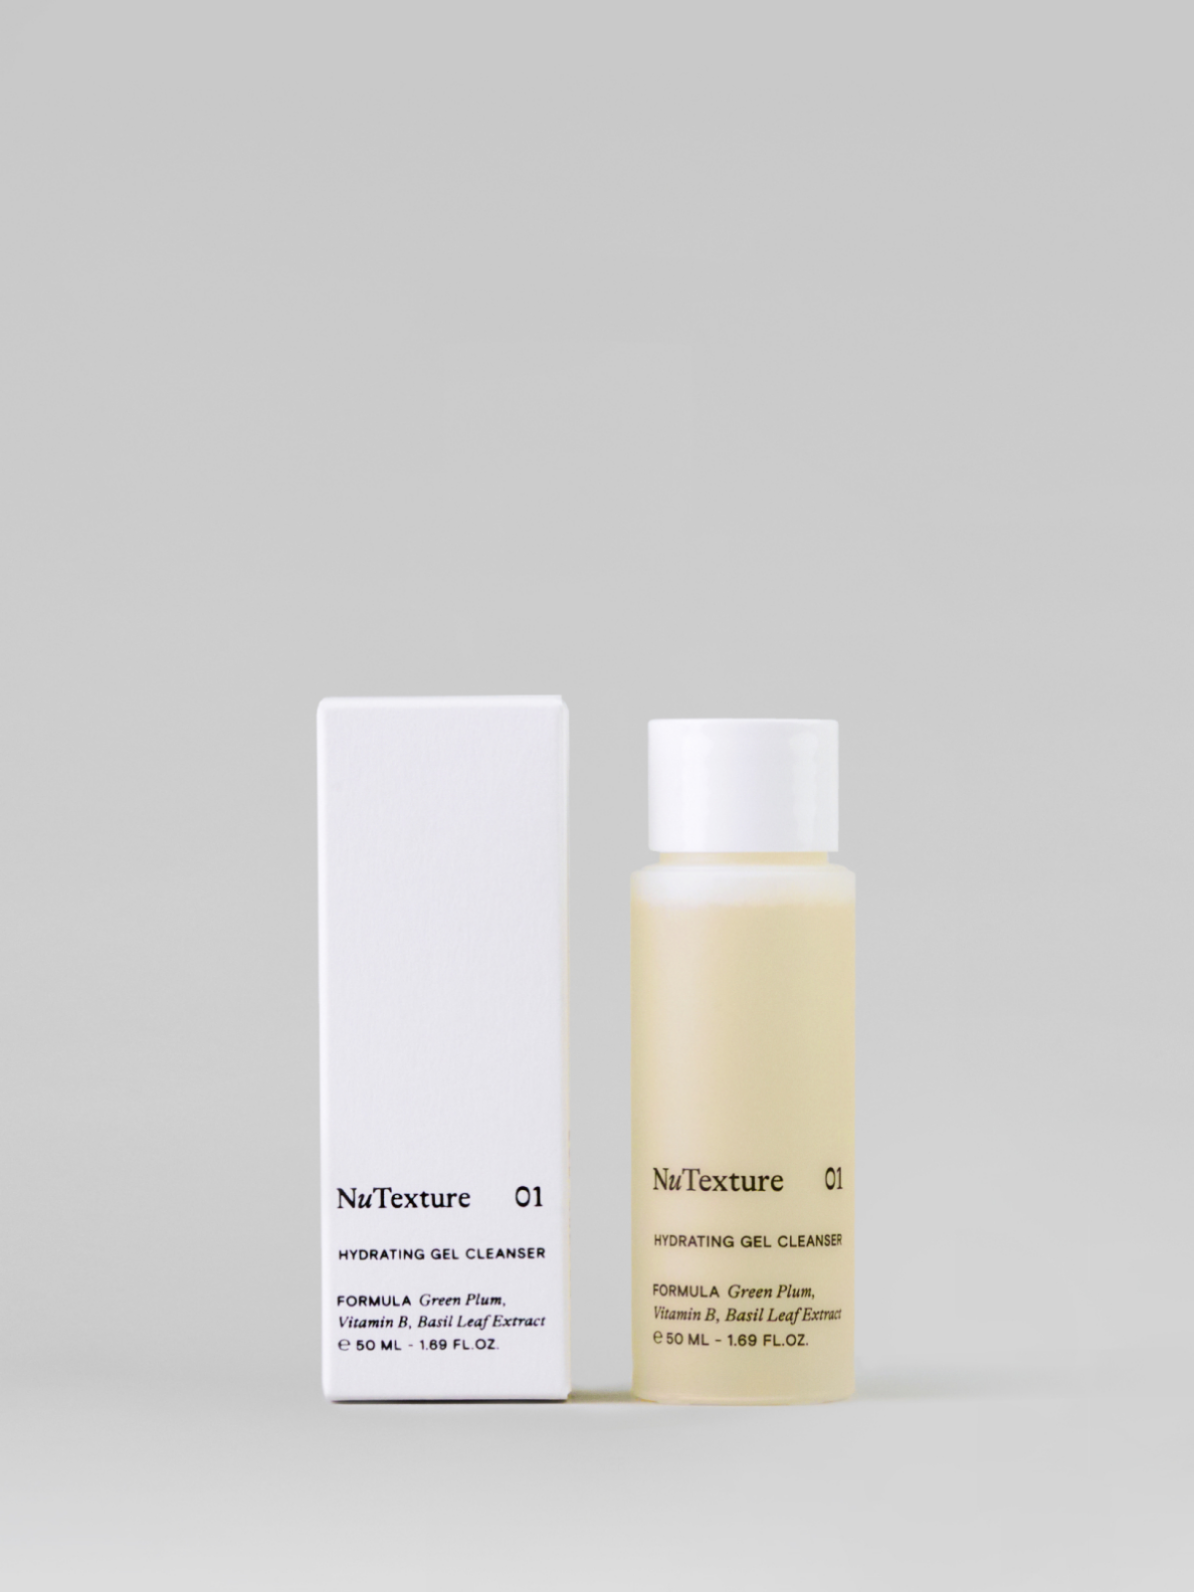 [NuTexture] HYDRATING GEL CLEANSER MINI